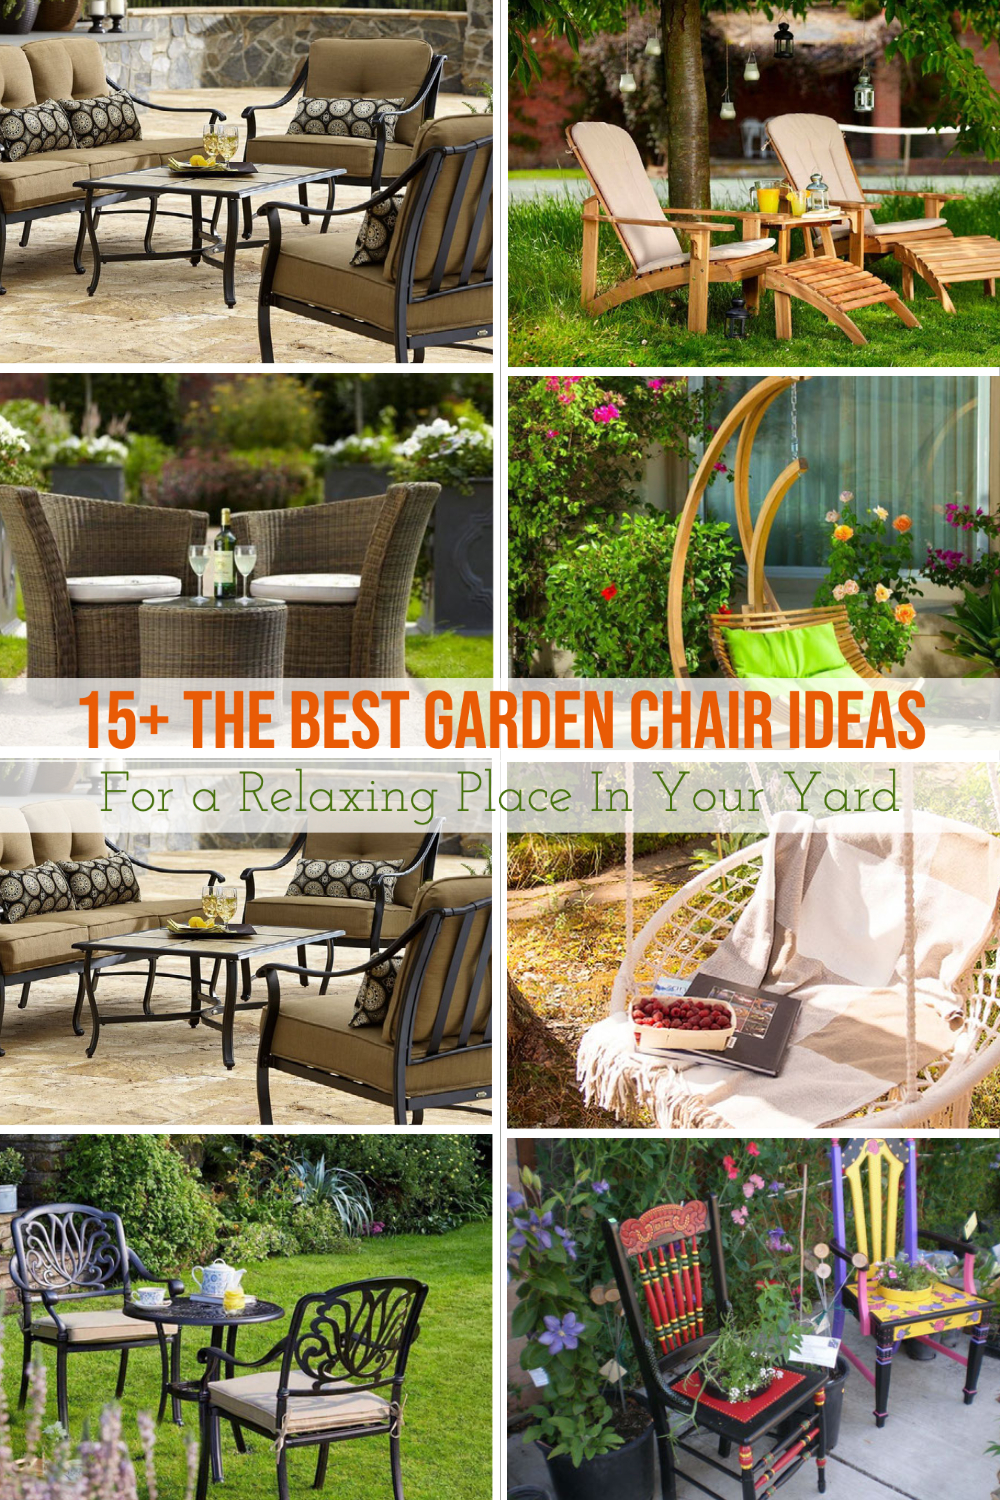 The Best Garden Chair Ideas For a Relaxing Place In Your Yard